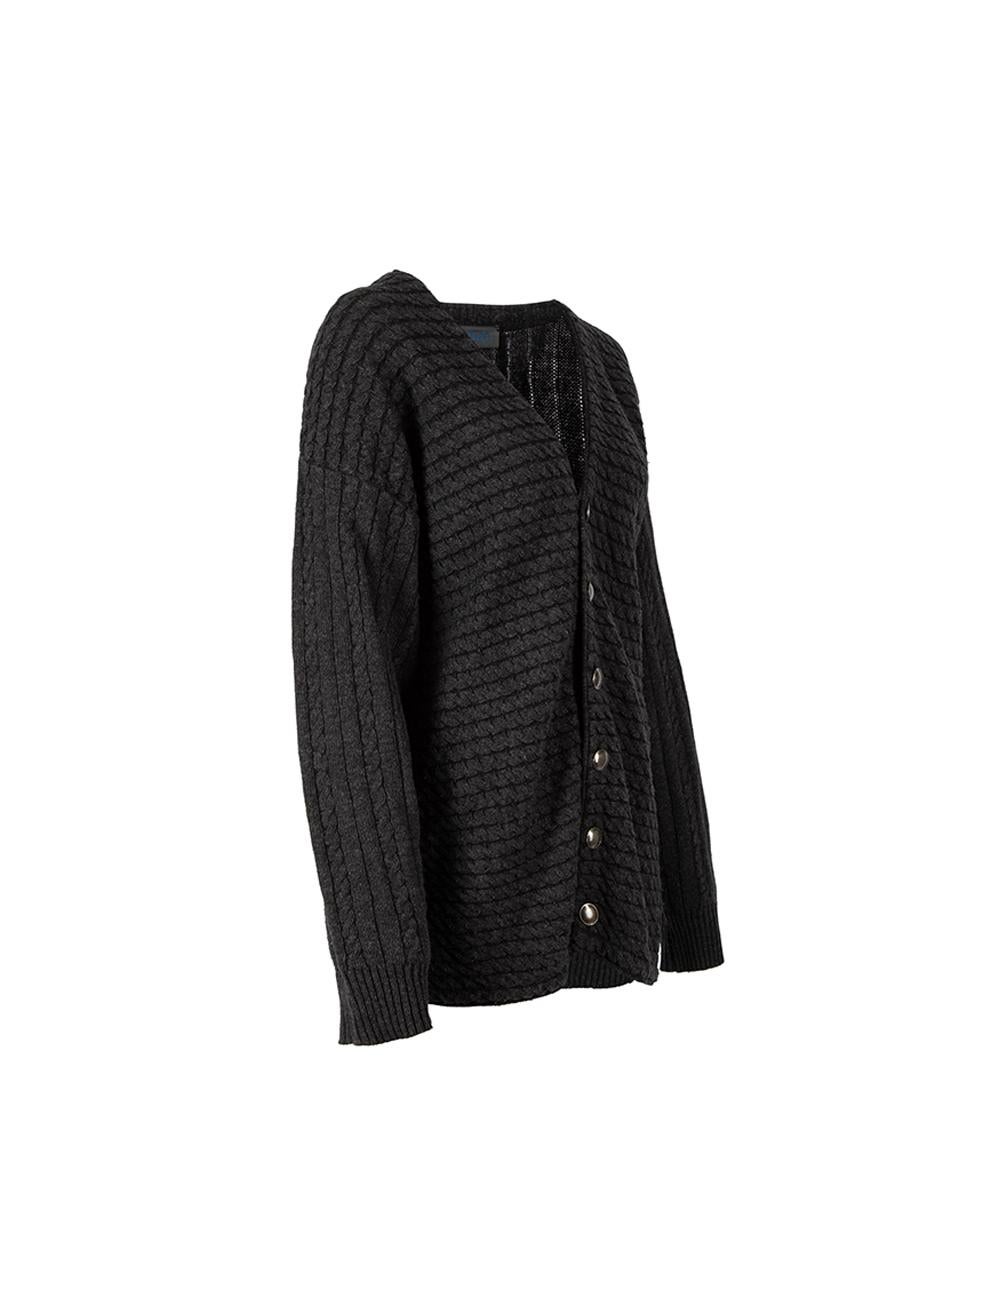 CONDITION is Very good. Minimal wear to cardigan is evident. Minimal wear to the knit with slight bobbling on this used Kenzo designer resale item. 



Details


Charcoal grey

Wool

Long sleeves cardigan

Chunky knit textured

Front button up